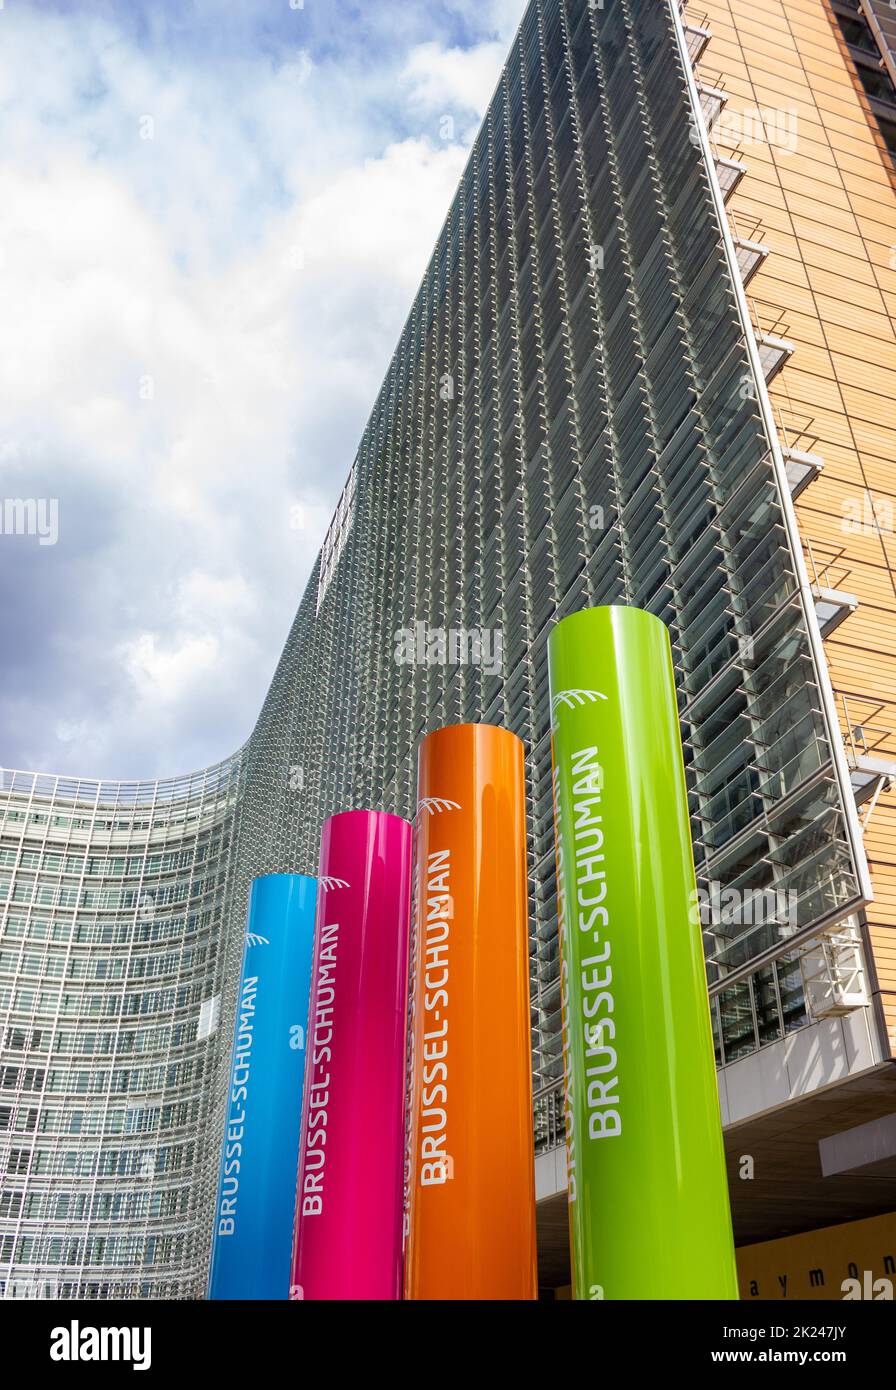 A picture of the transportation hub colorful columns at the bottom of the Le Berlaymont building (Brussels). Stock Photo